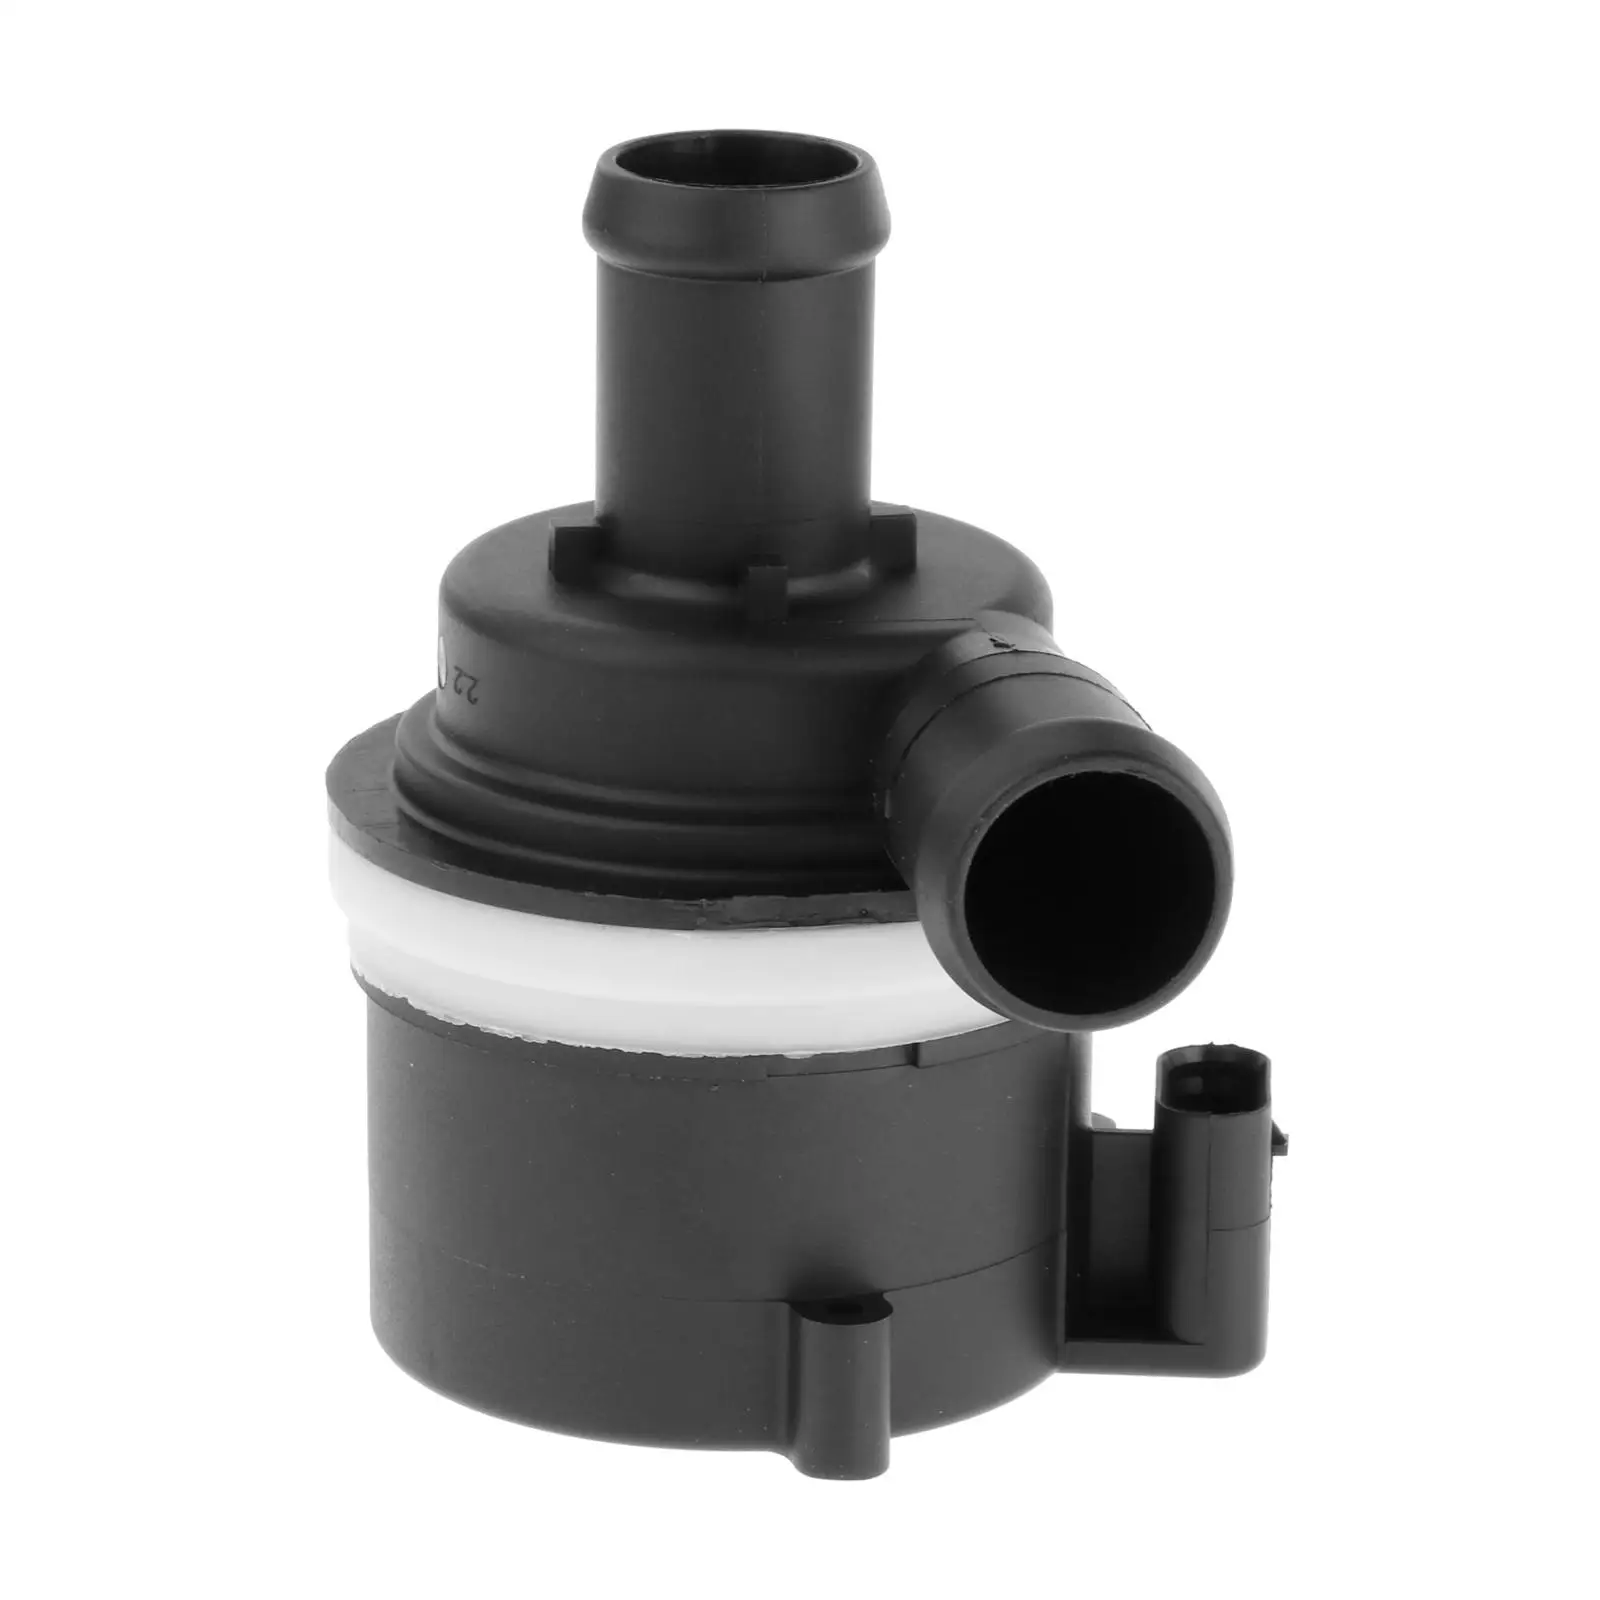 Auxiliary Water Pump Fits for  X6 E71 2007-2014 64116951549 Replace Parts Accessory 1piece